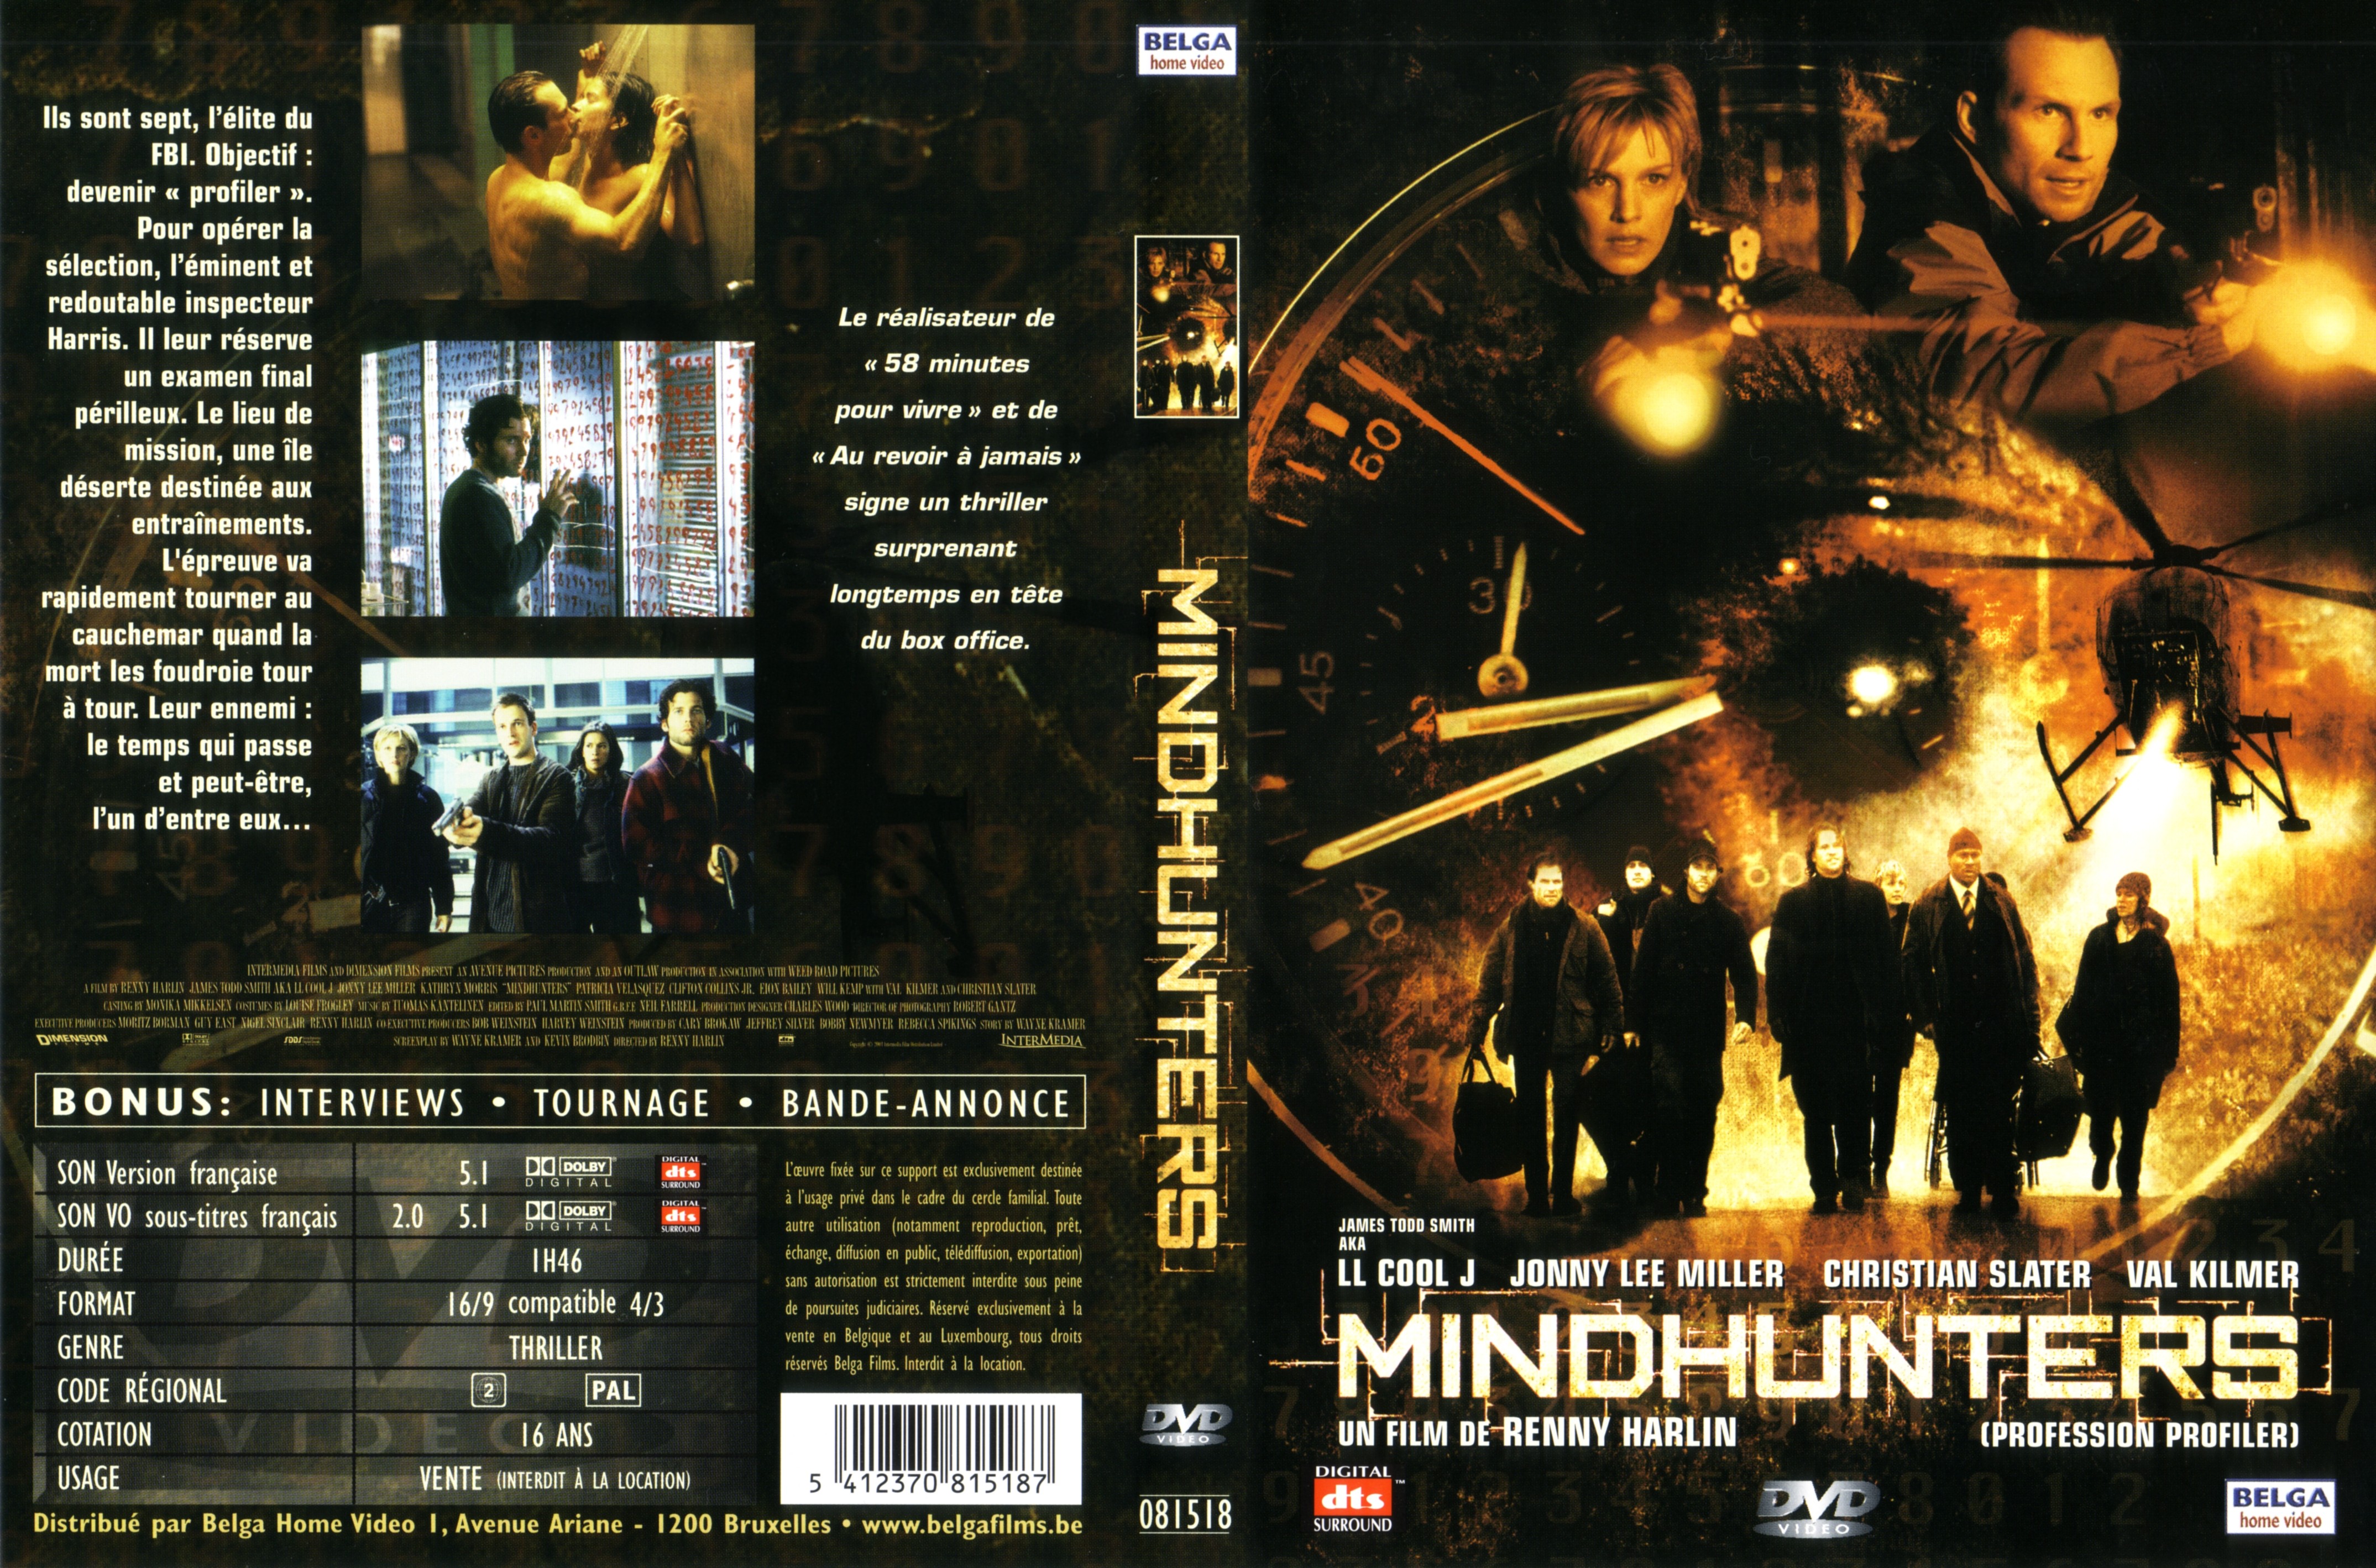 Jaquette DVD Mindhunters